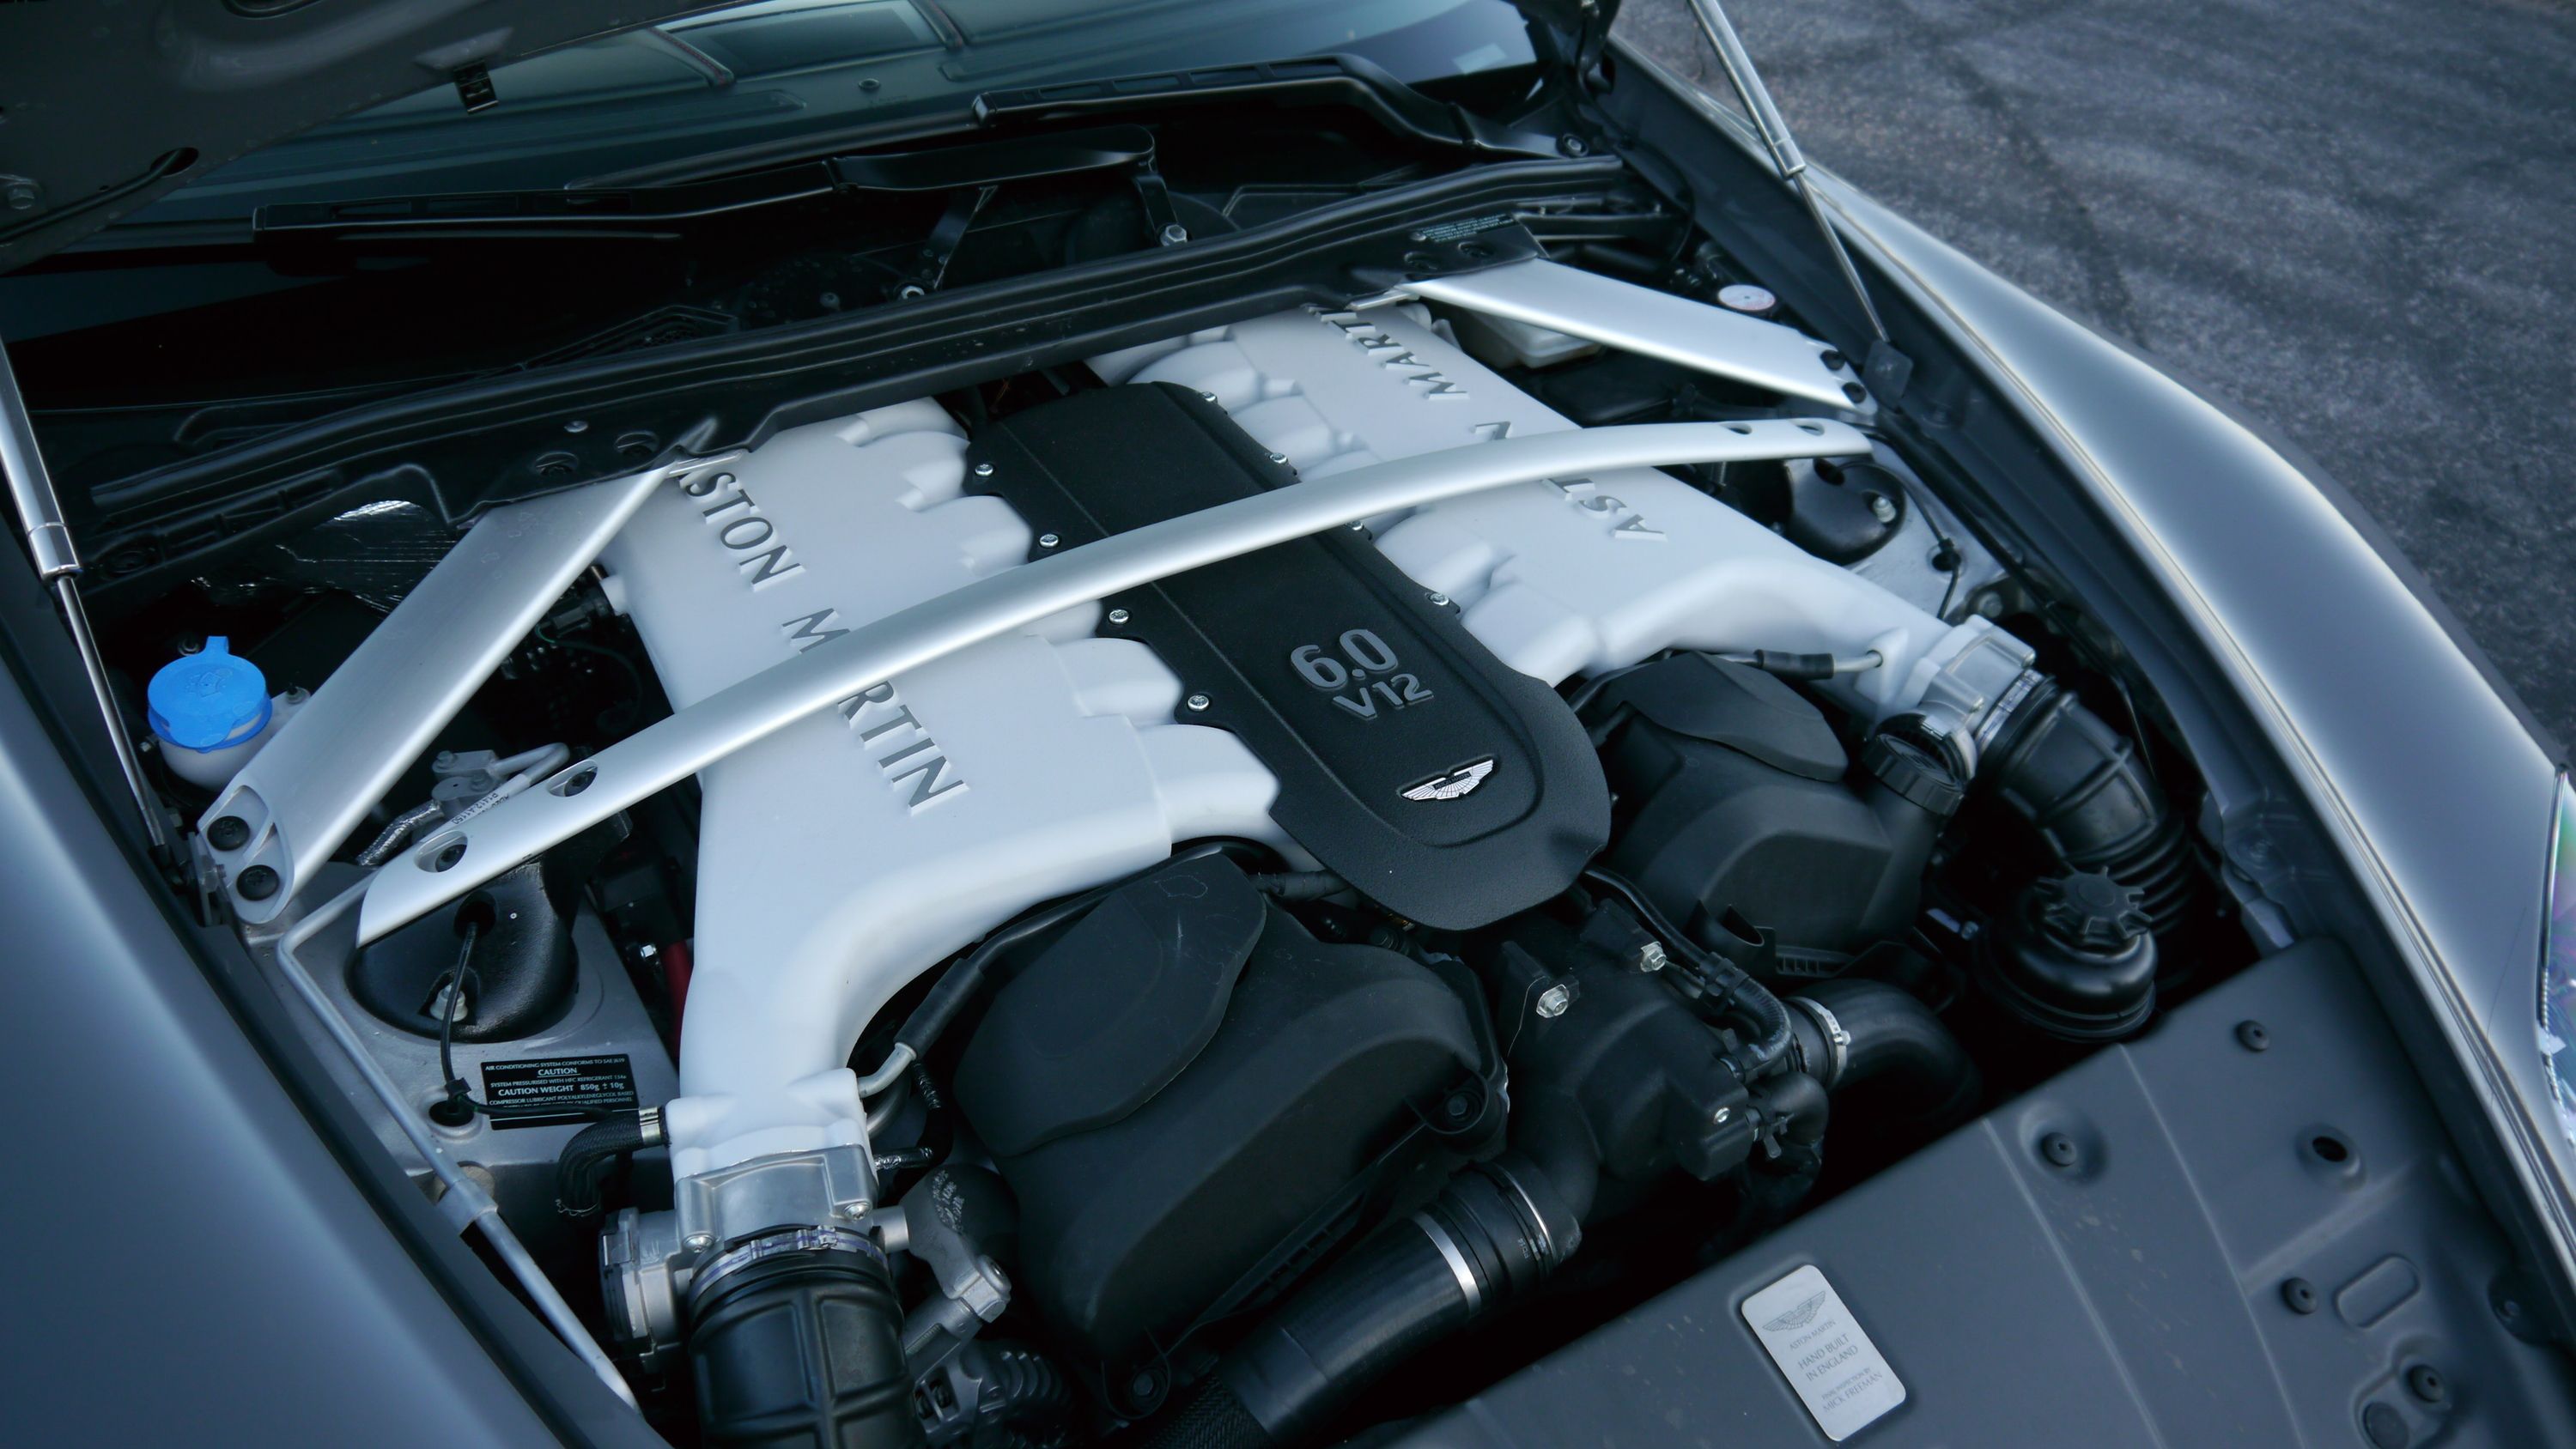 The 6-liter V12 engine in the Aston Martin Vantage S Roadster develops 565 hp and 457 lb-ft of torque